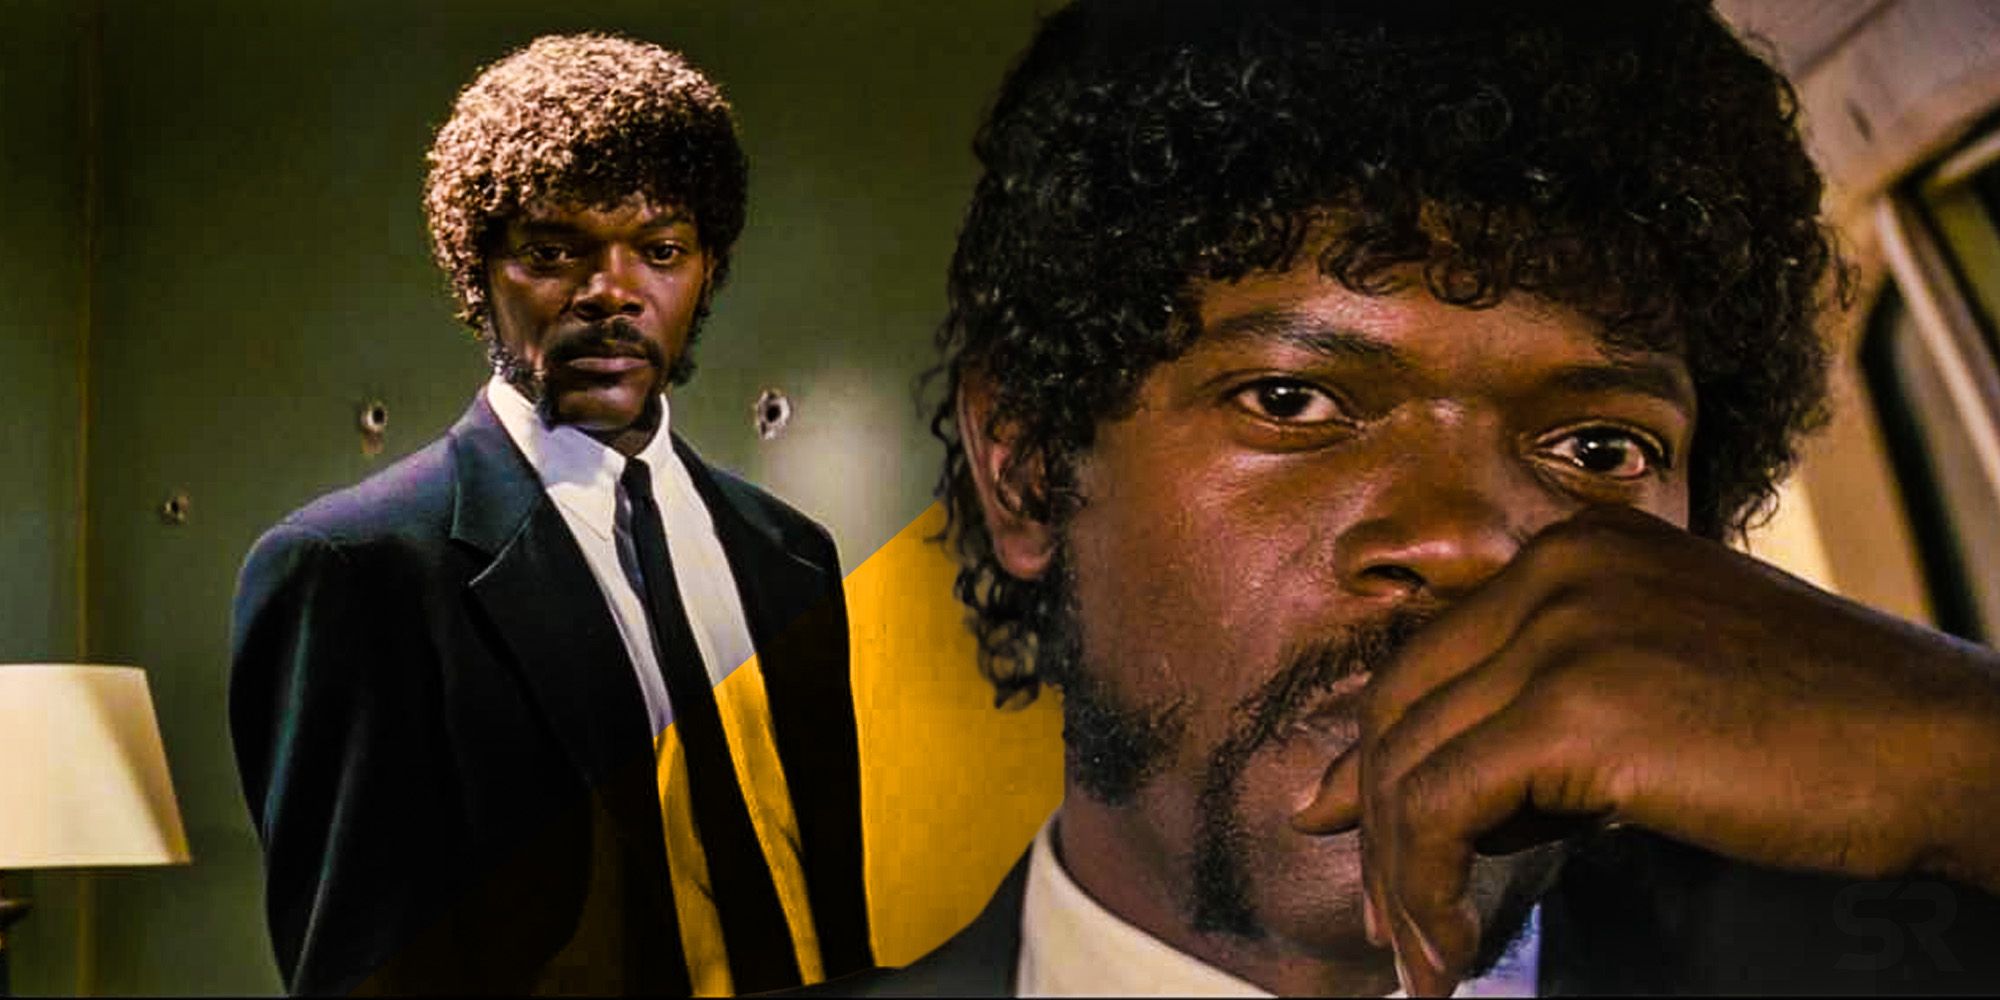 Pulp Fiction S Divine Intervention Gun Scene May Have Been Faked All Along Laptrinhx